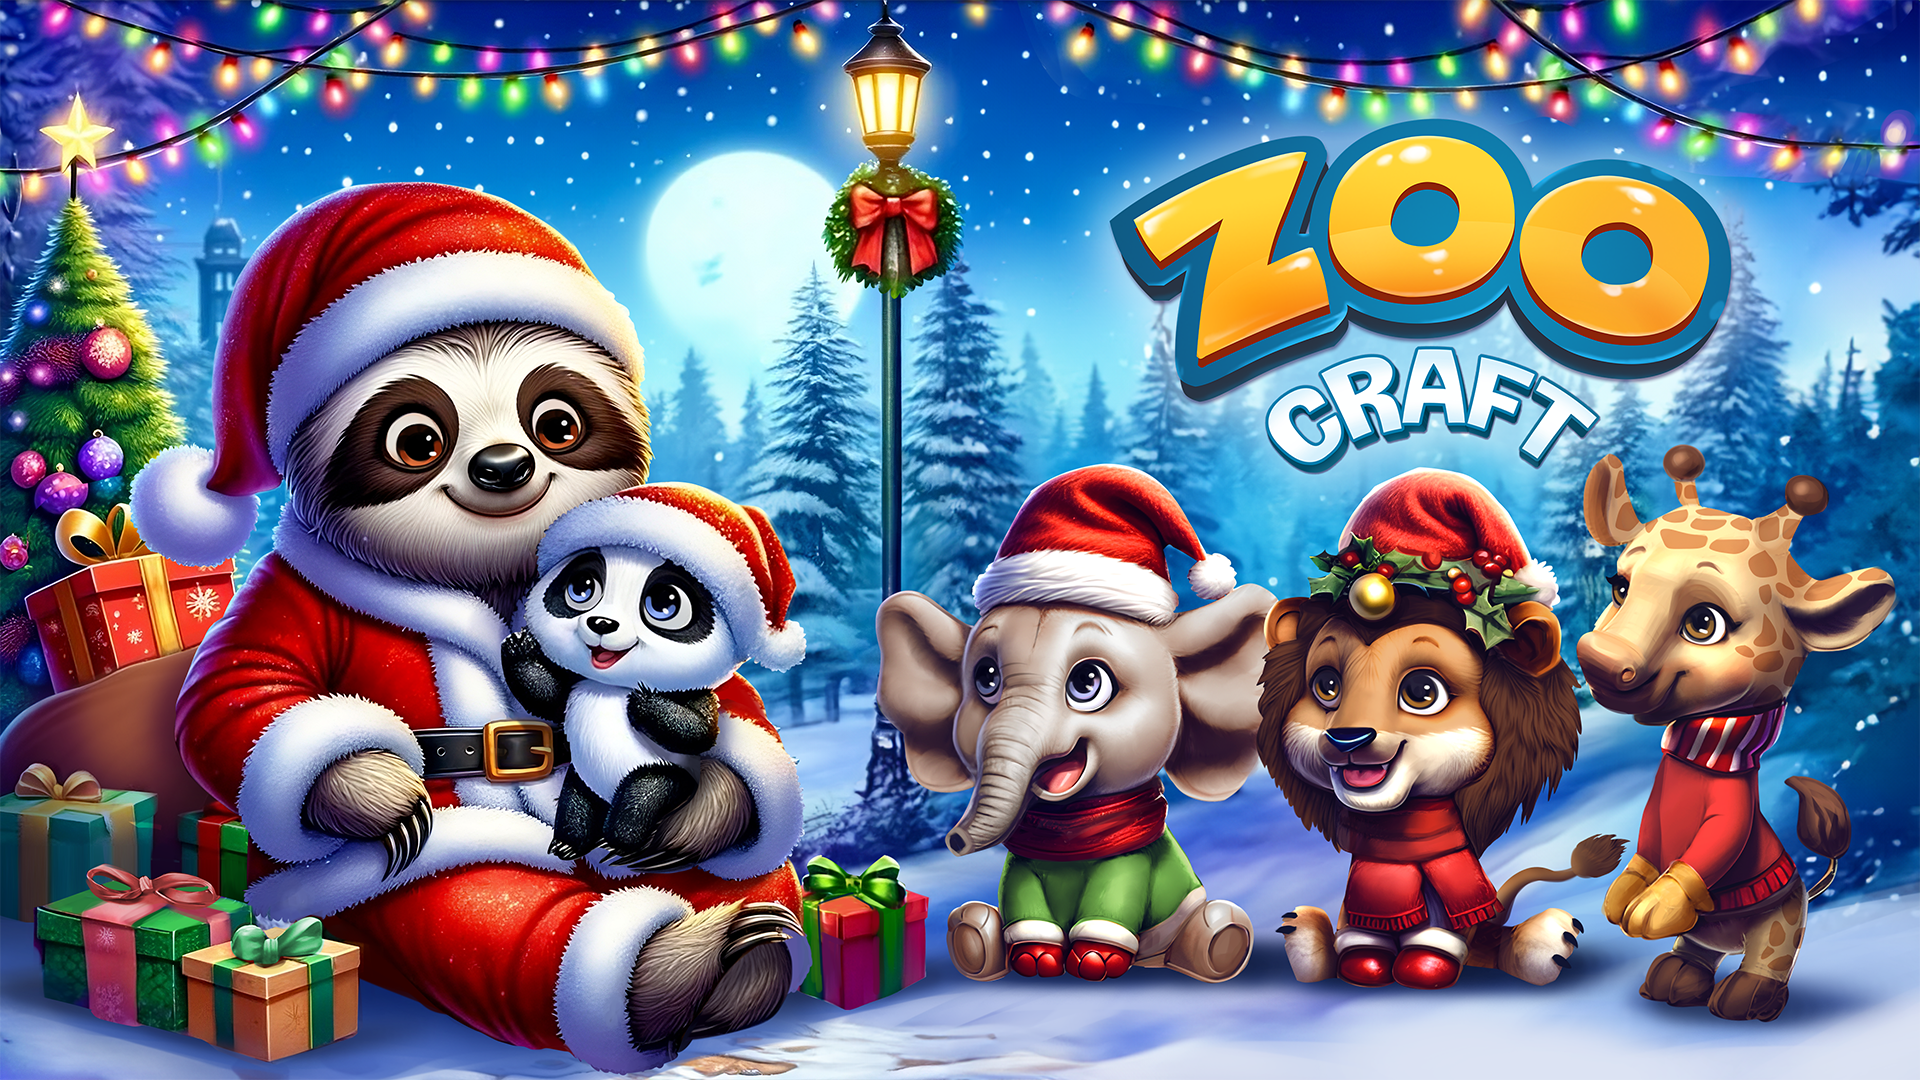 Animal Tycoon - Zoo Craft Game APK for Android Download